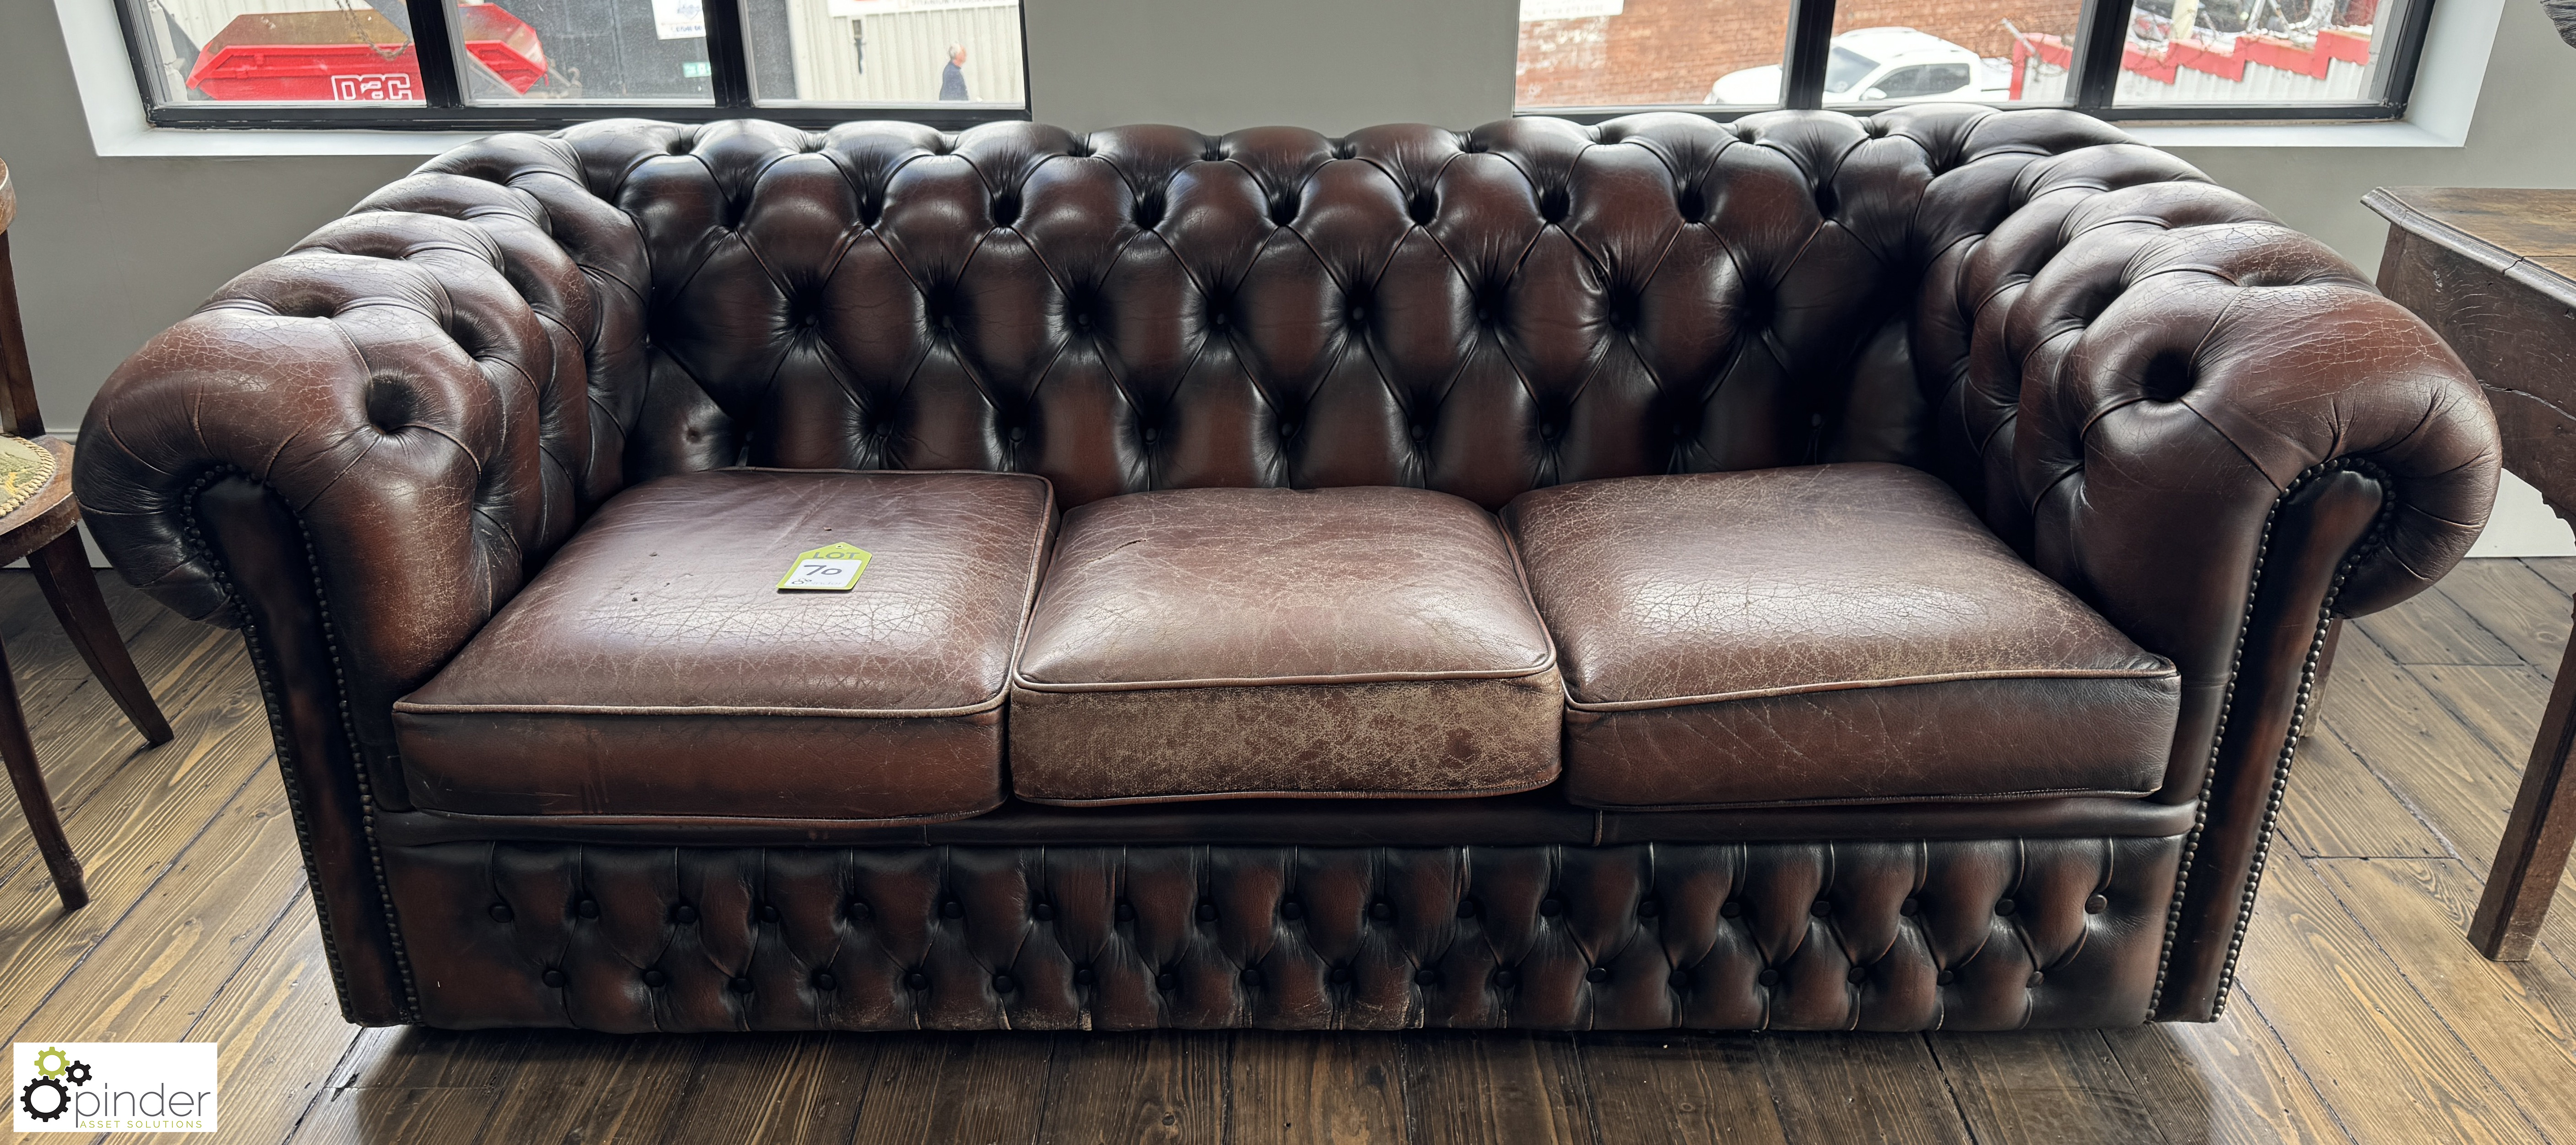 Leather button back Chesterfield Sofa, 1900mm wide